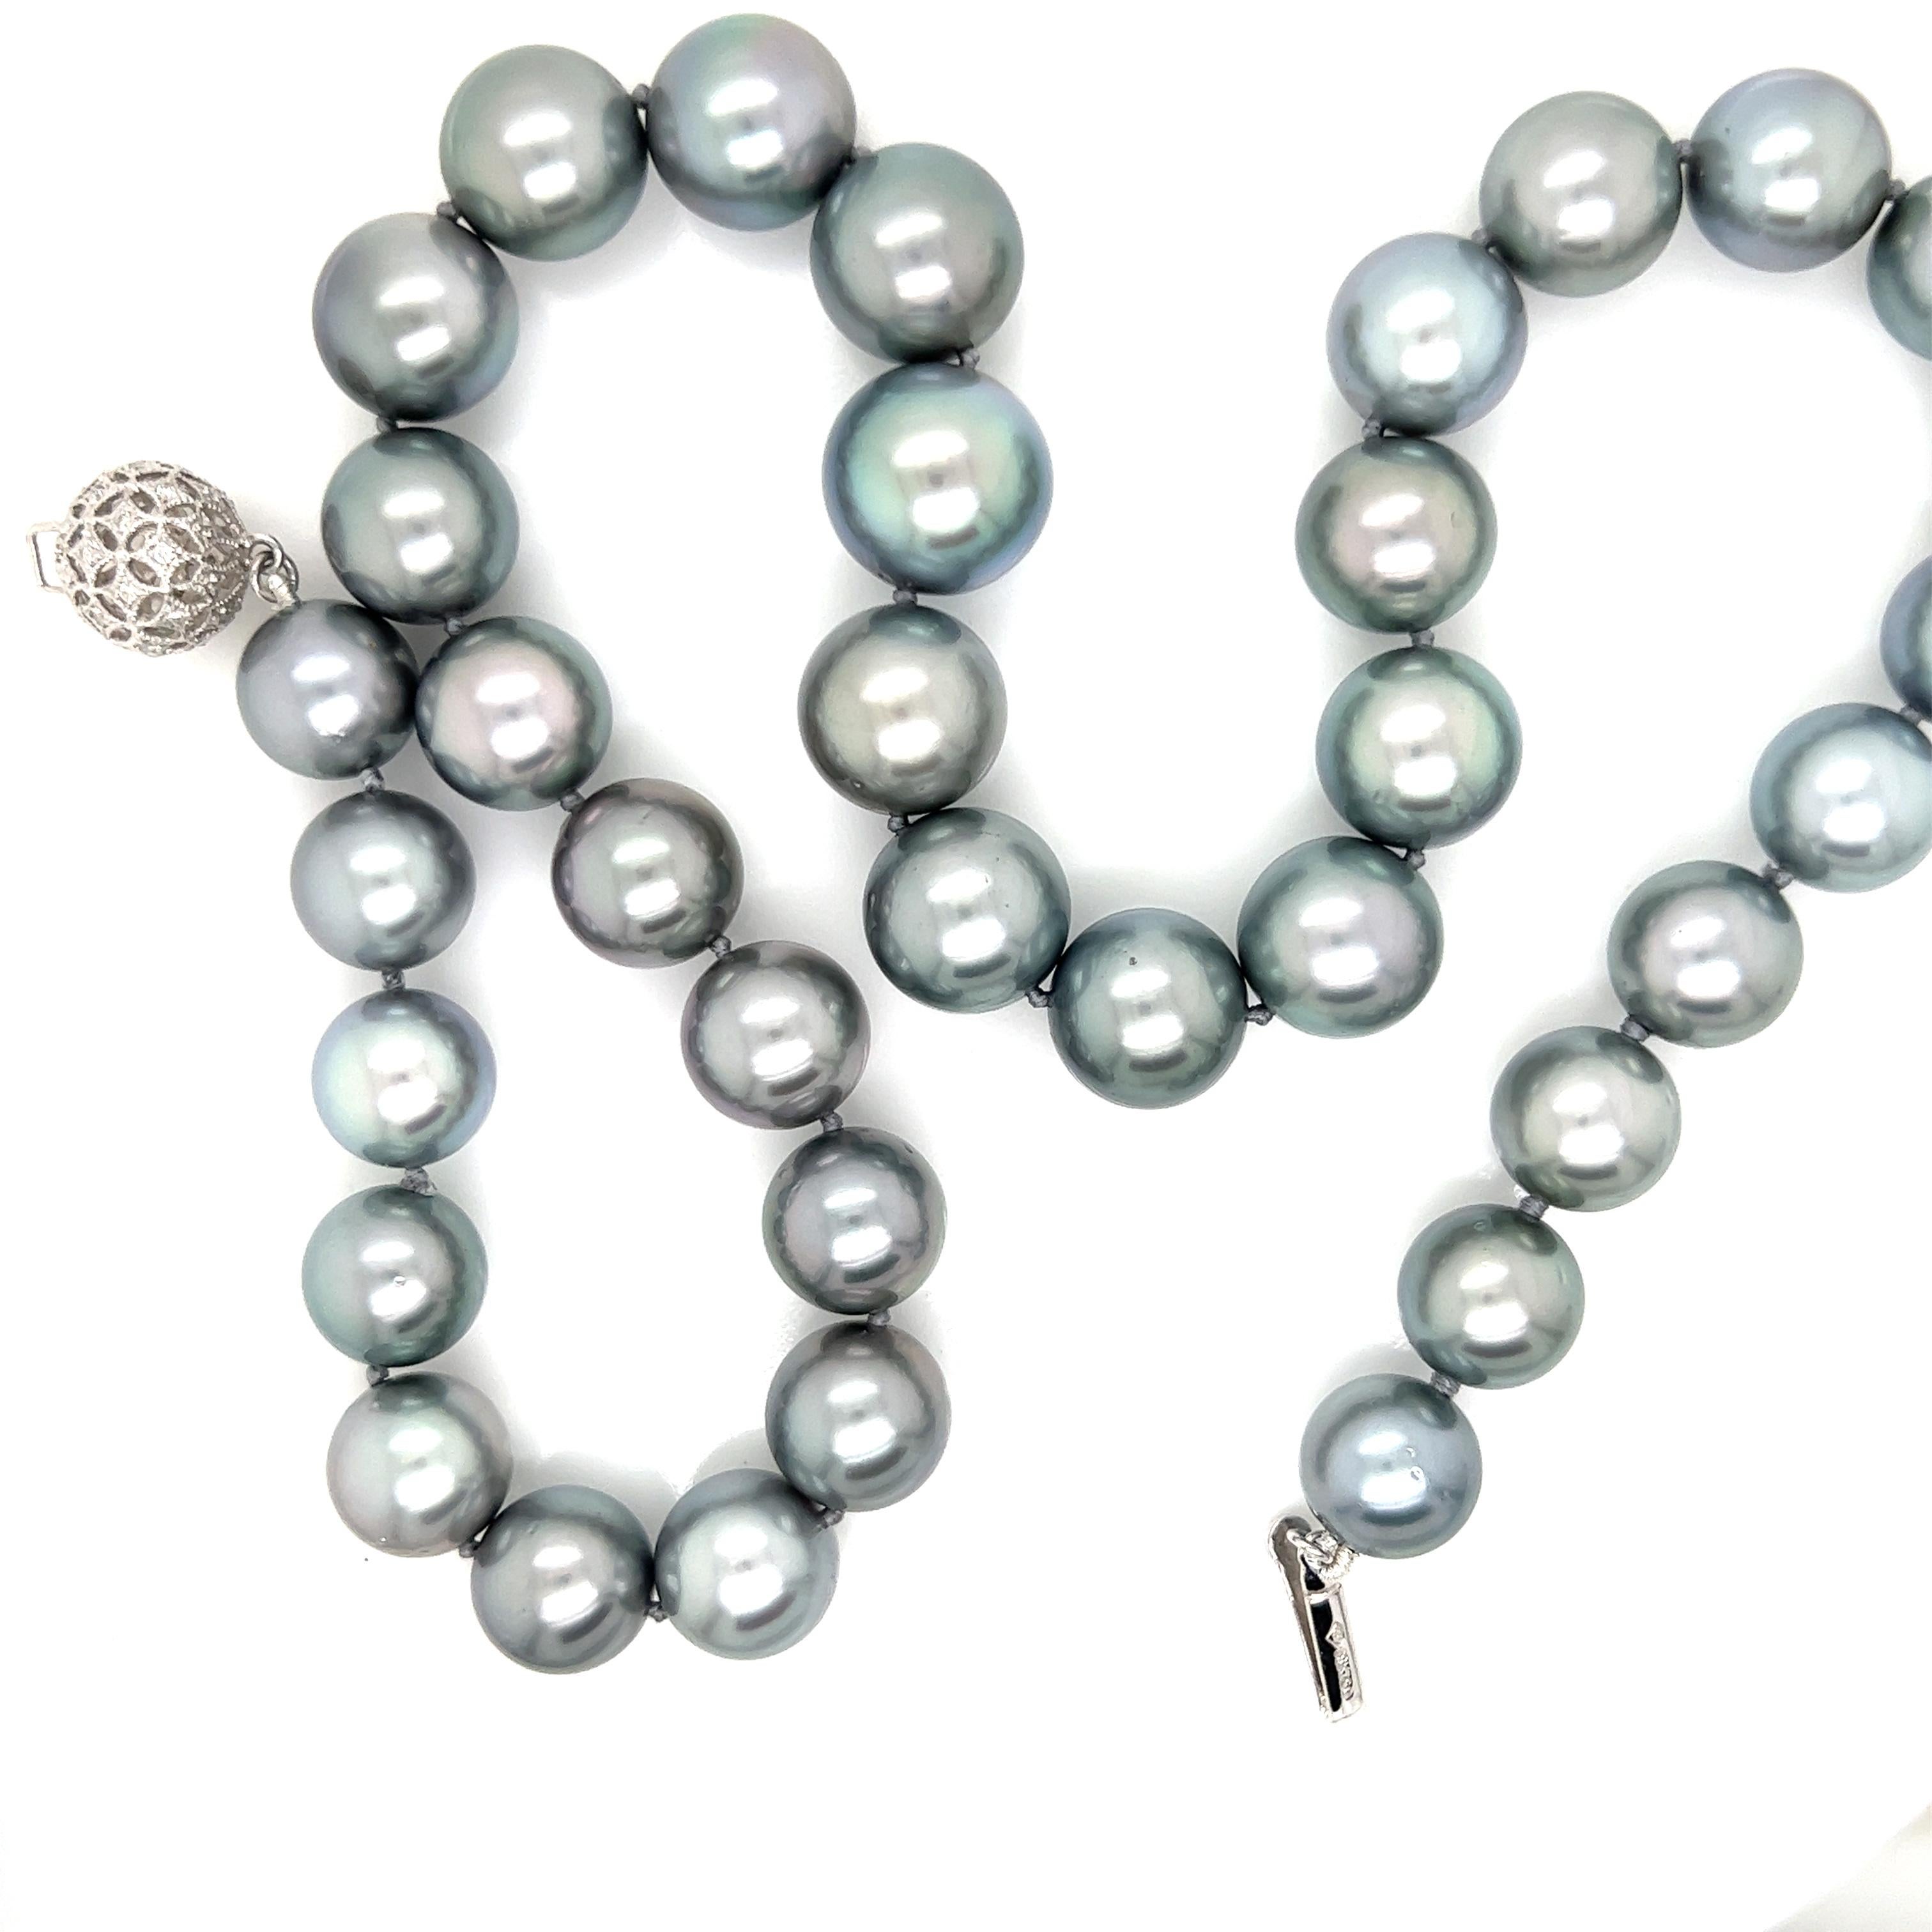 14 mm pearl necklace